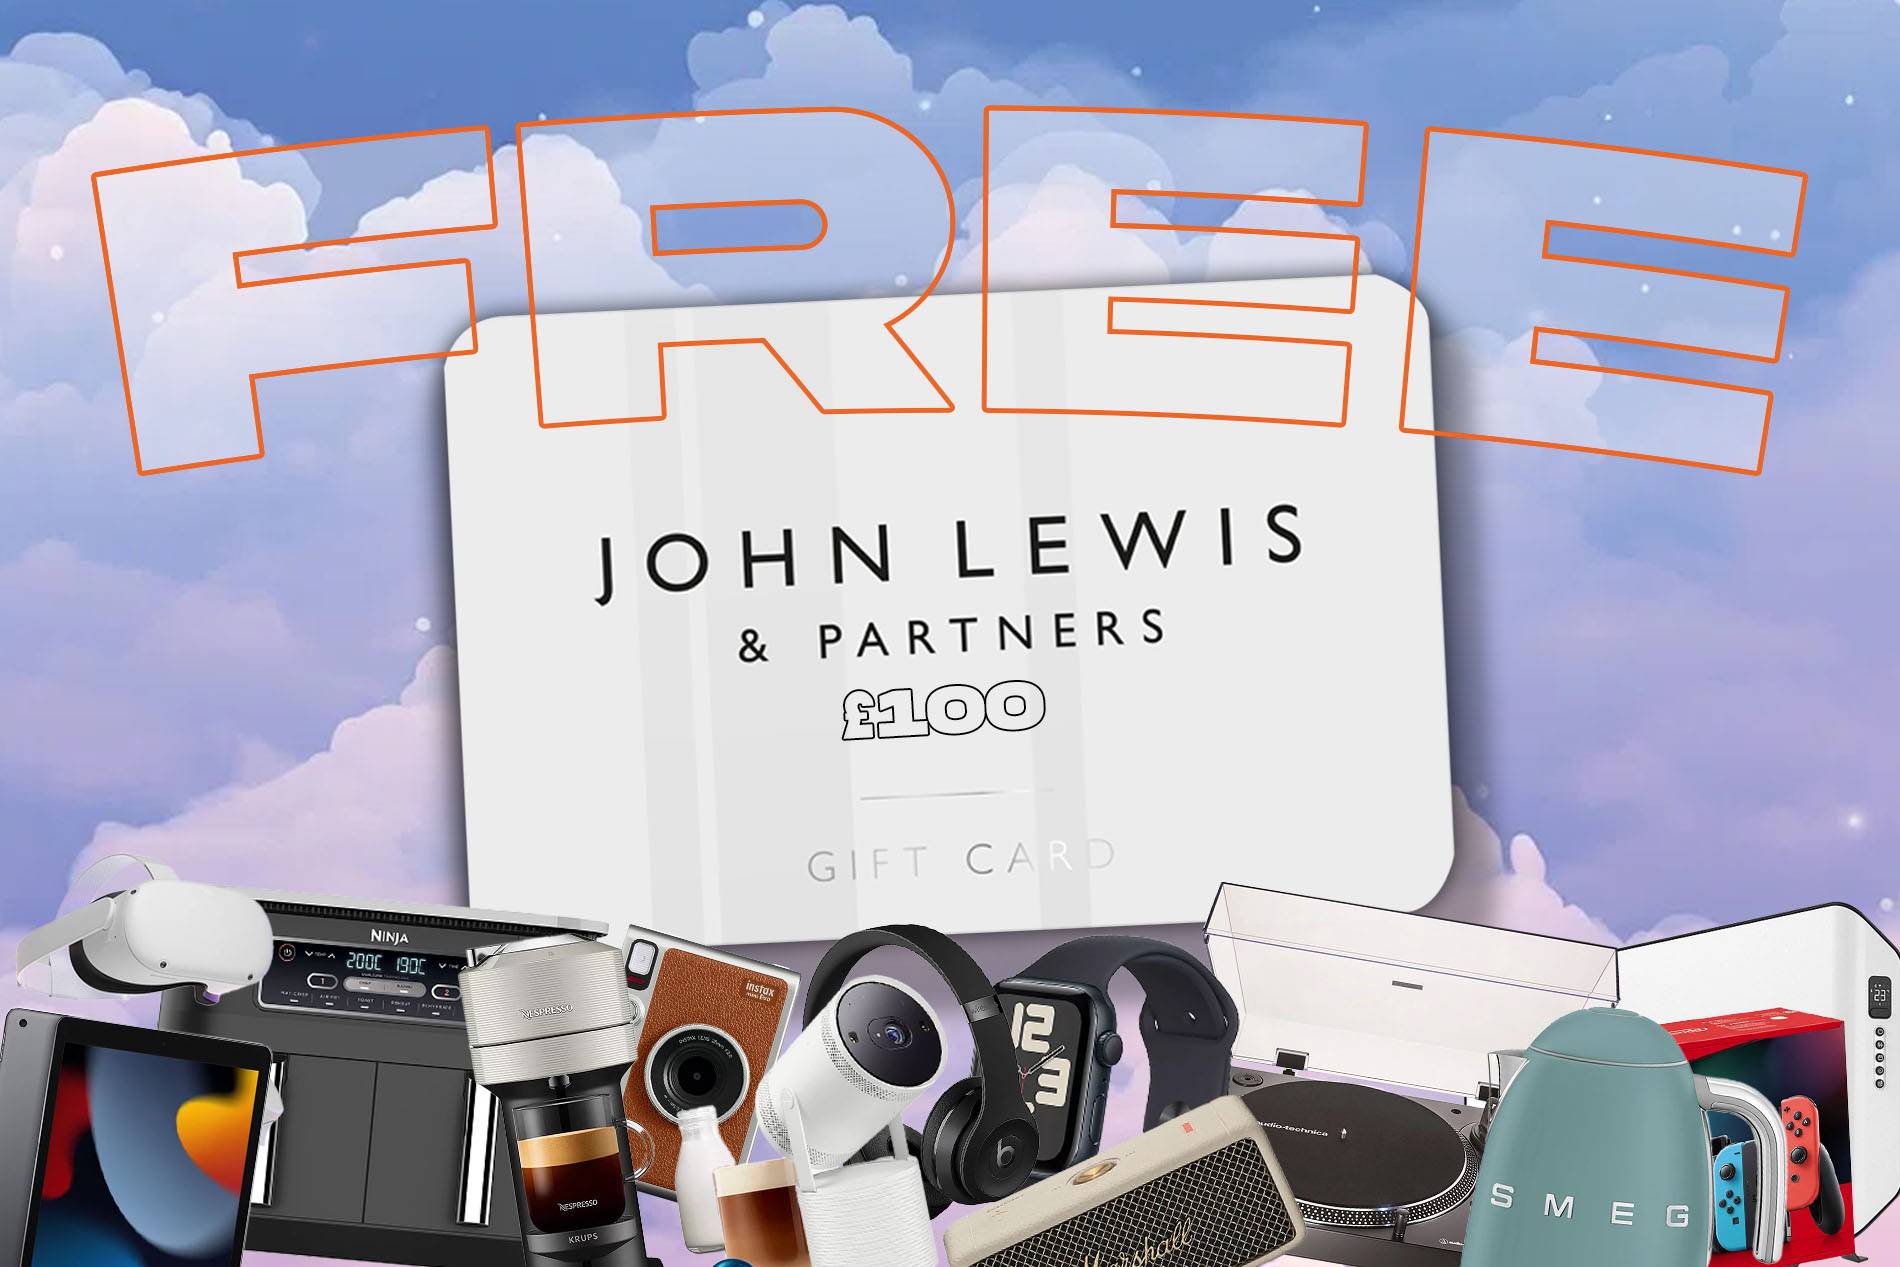 FREE: Chance To Win £100 John Lewis Voucher (Prize Tripled Over £1 Spend)